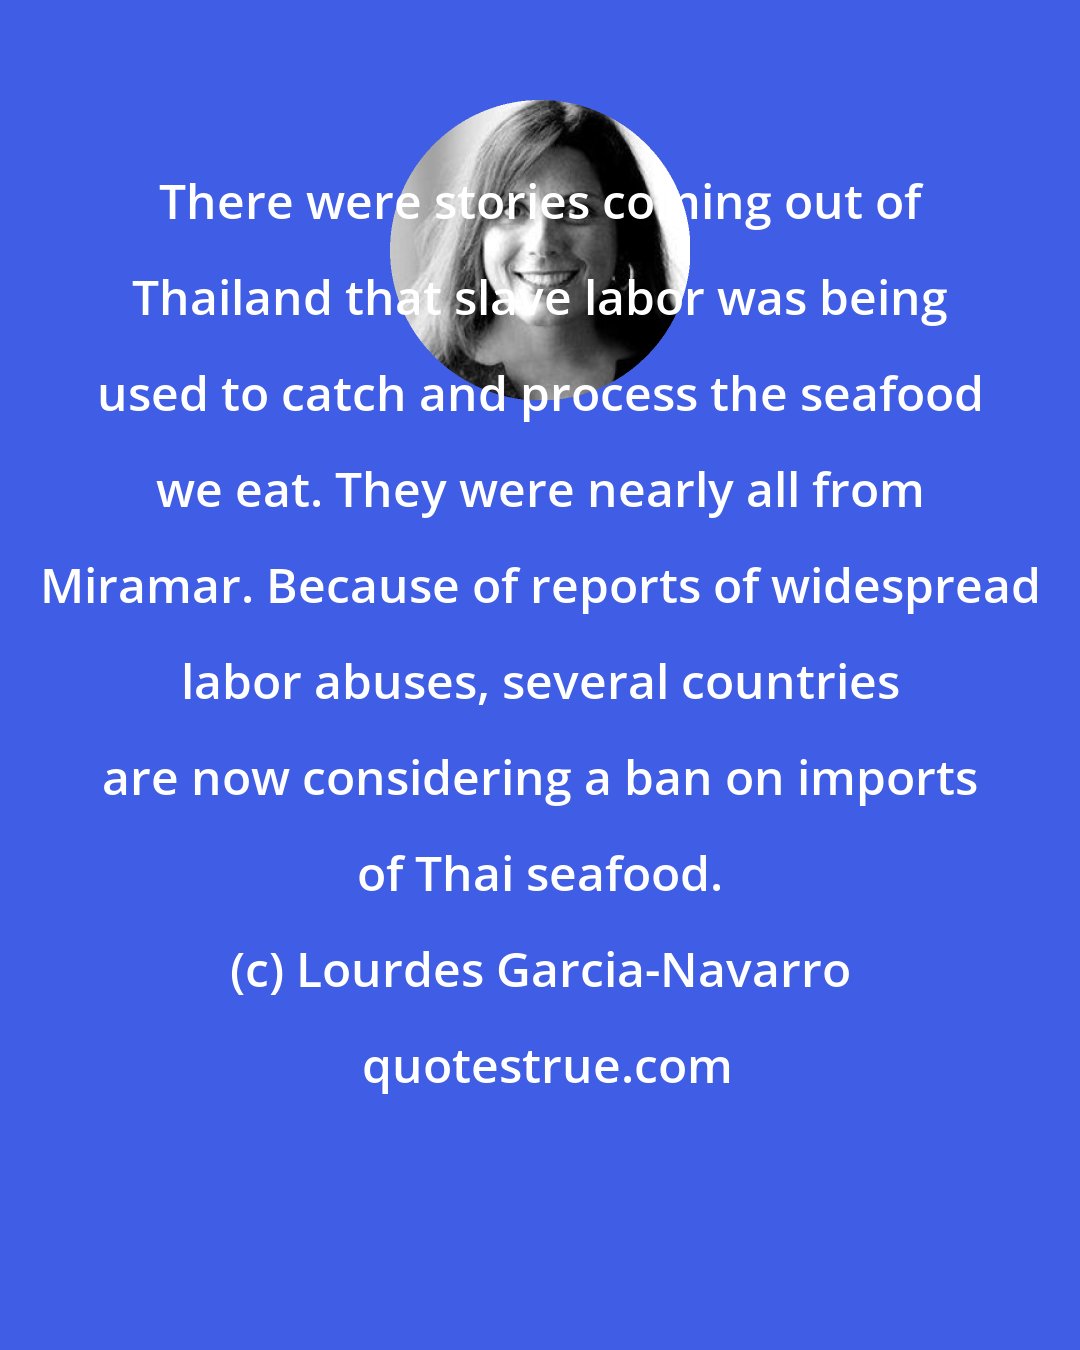 Lourdes Garcia-Navarro: There were stories coming out of Thailand that slave labor was being used to catch and process the seafood we eat. They were nearly all from Miramar. Because of reports of widespread labor abuses, several countries are now considering a ban on imports of Thai seafood.